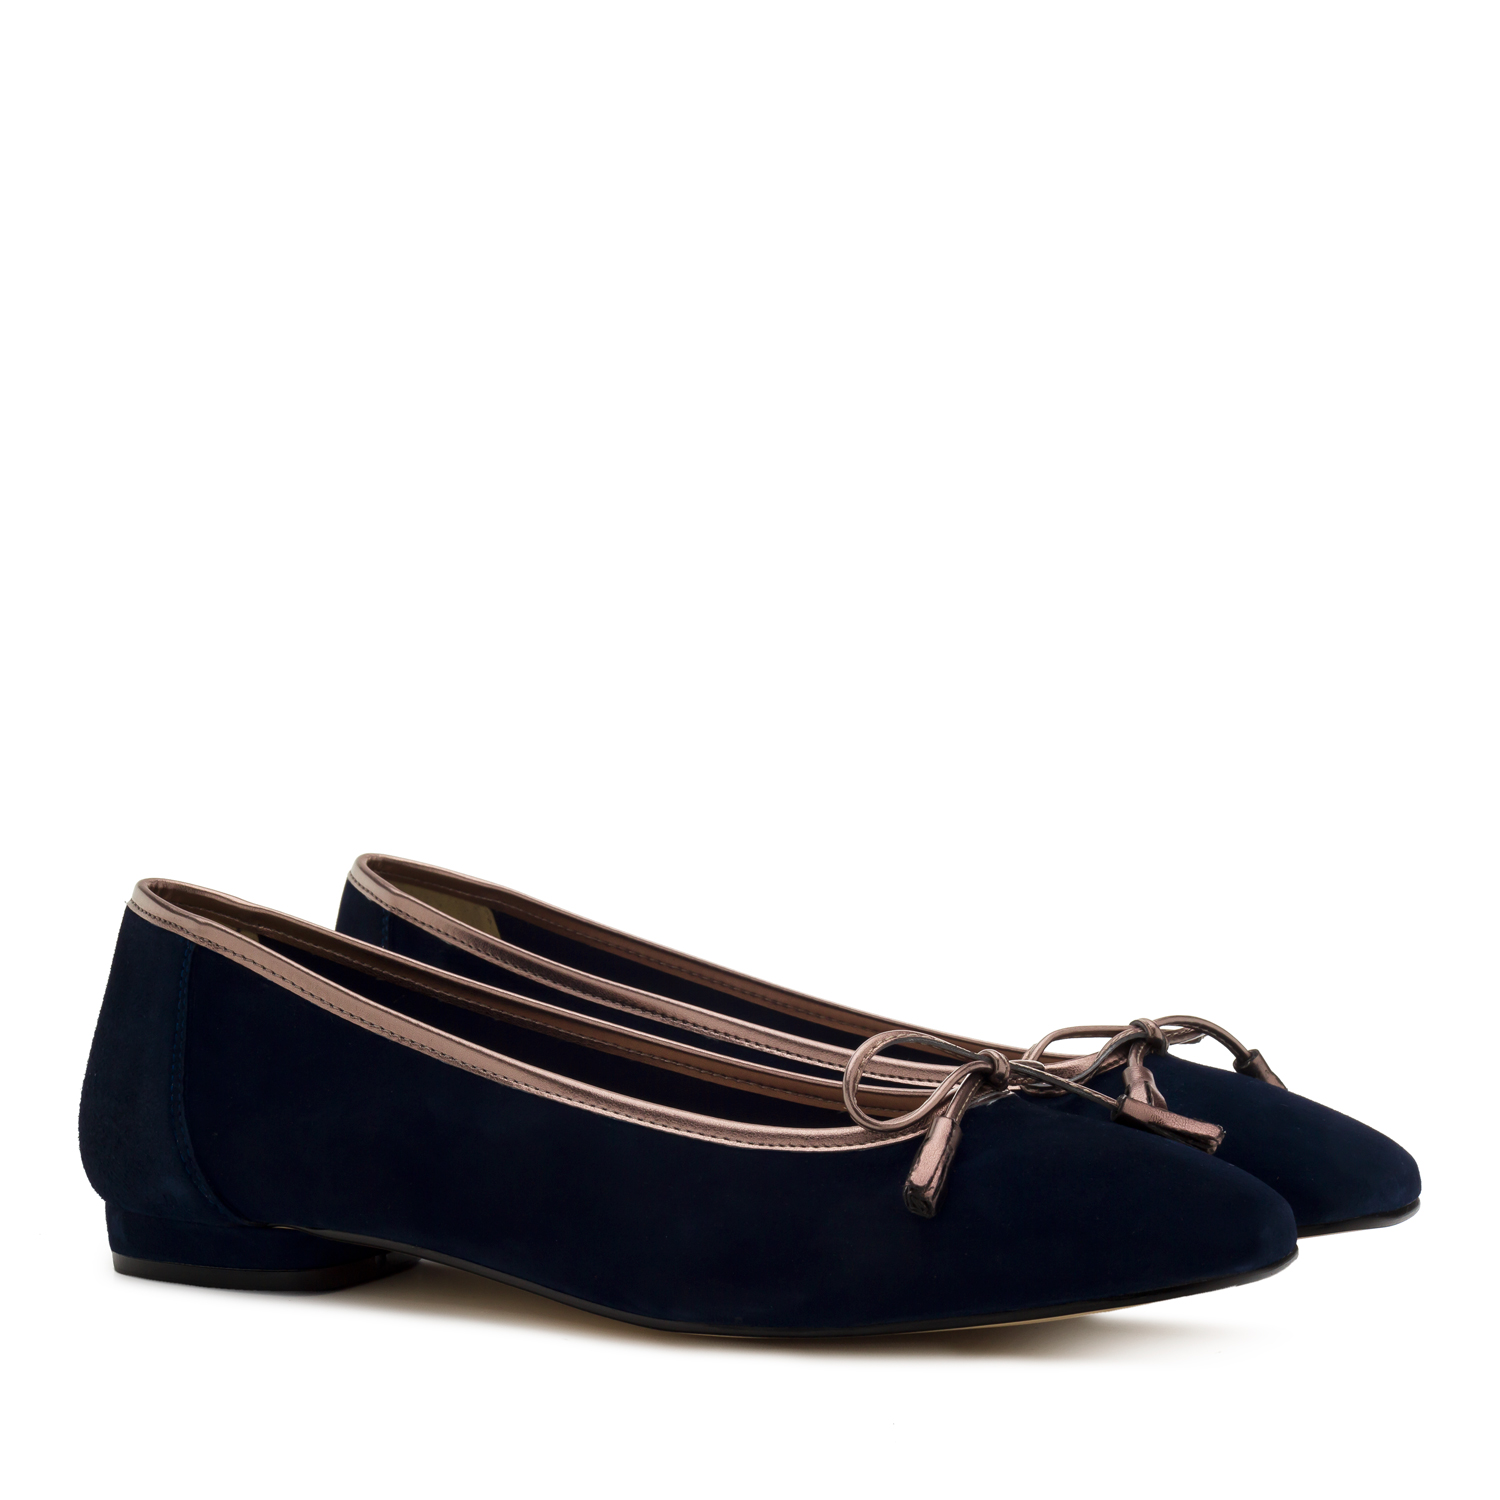 Bow Ballet Flats in Navy Suede Leather 